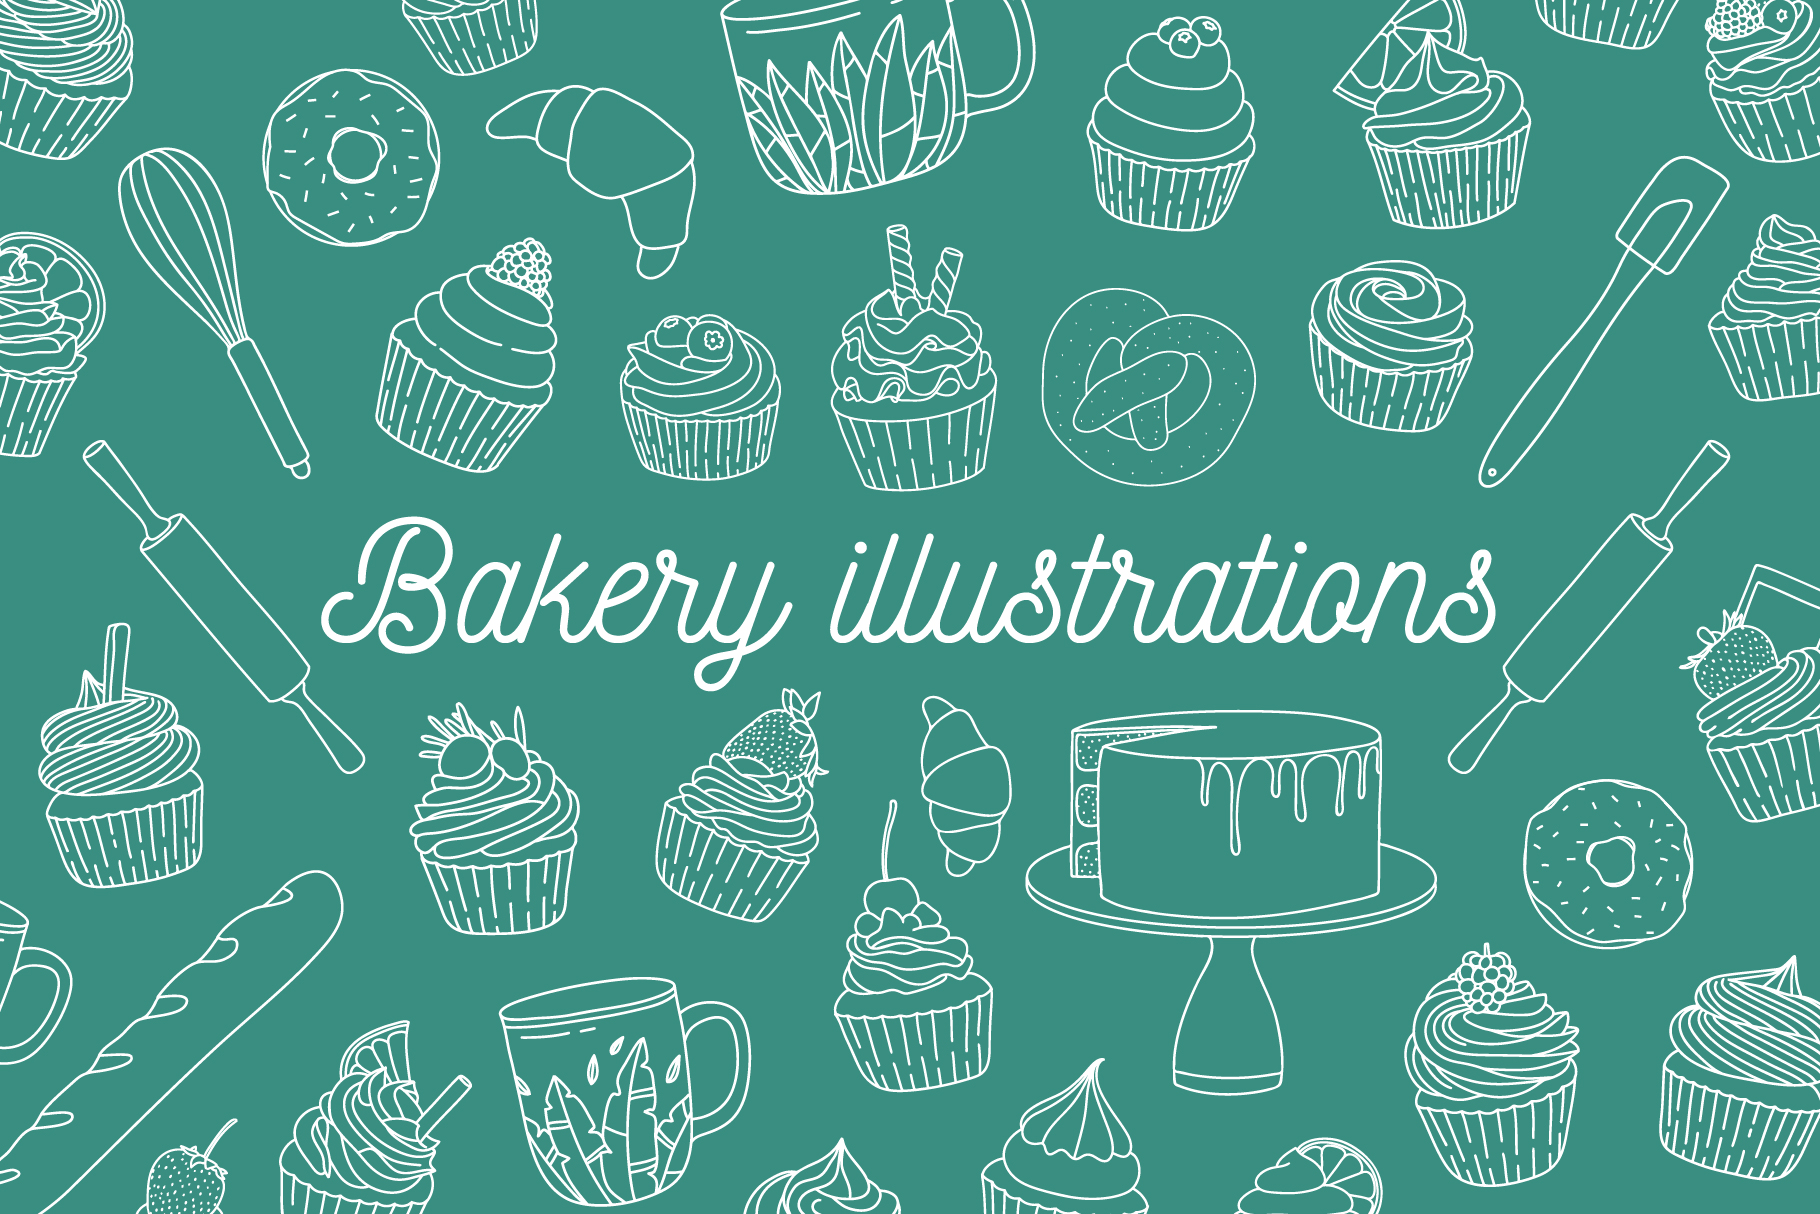 Download Pack of bakery illustrations